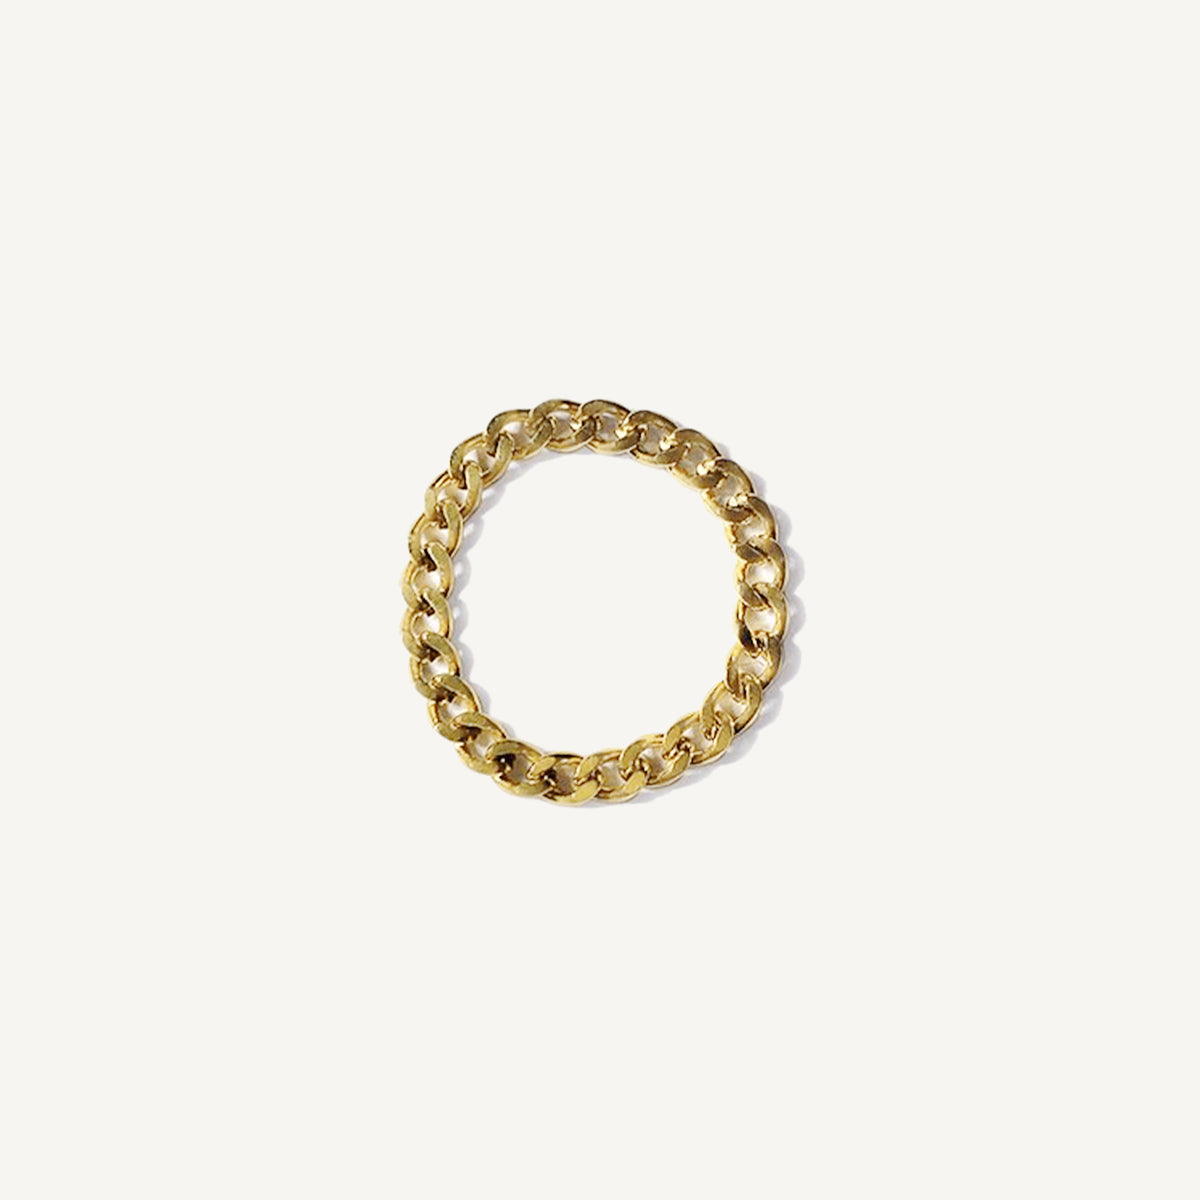 The Petite Cuban Chain Soft Ring